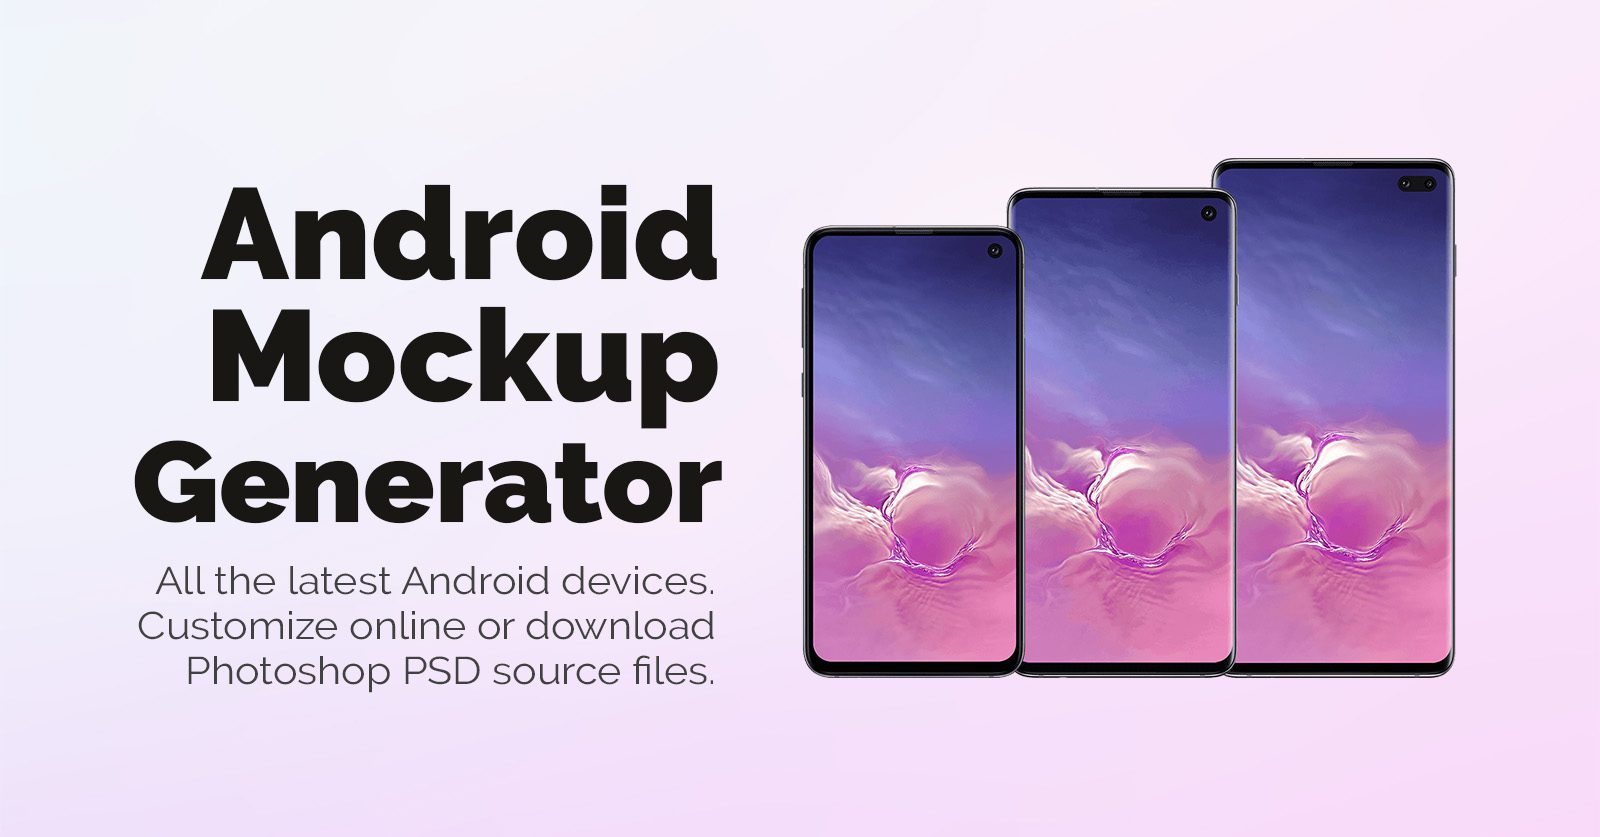 View 32 Android Mockup Generator Online